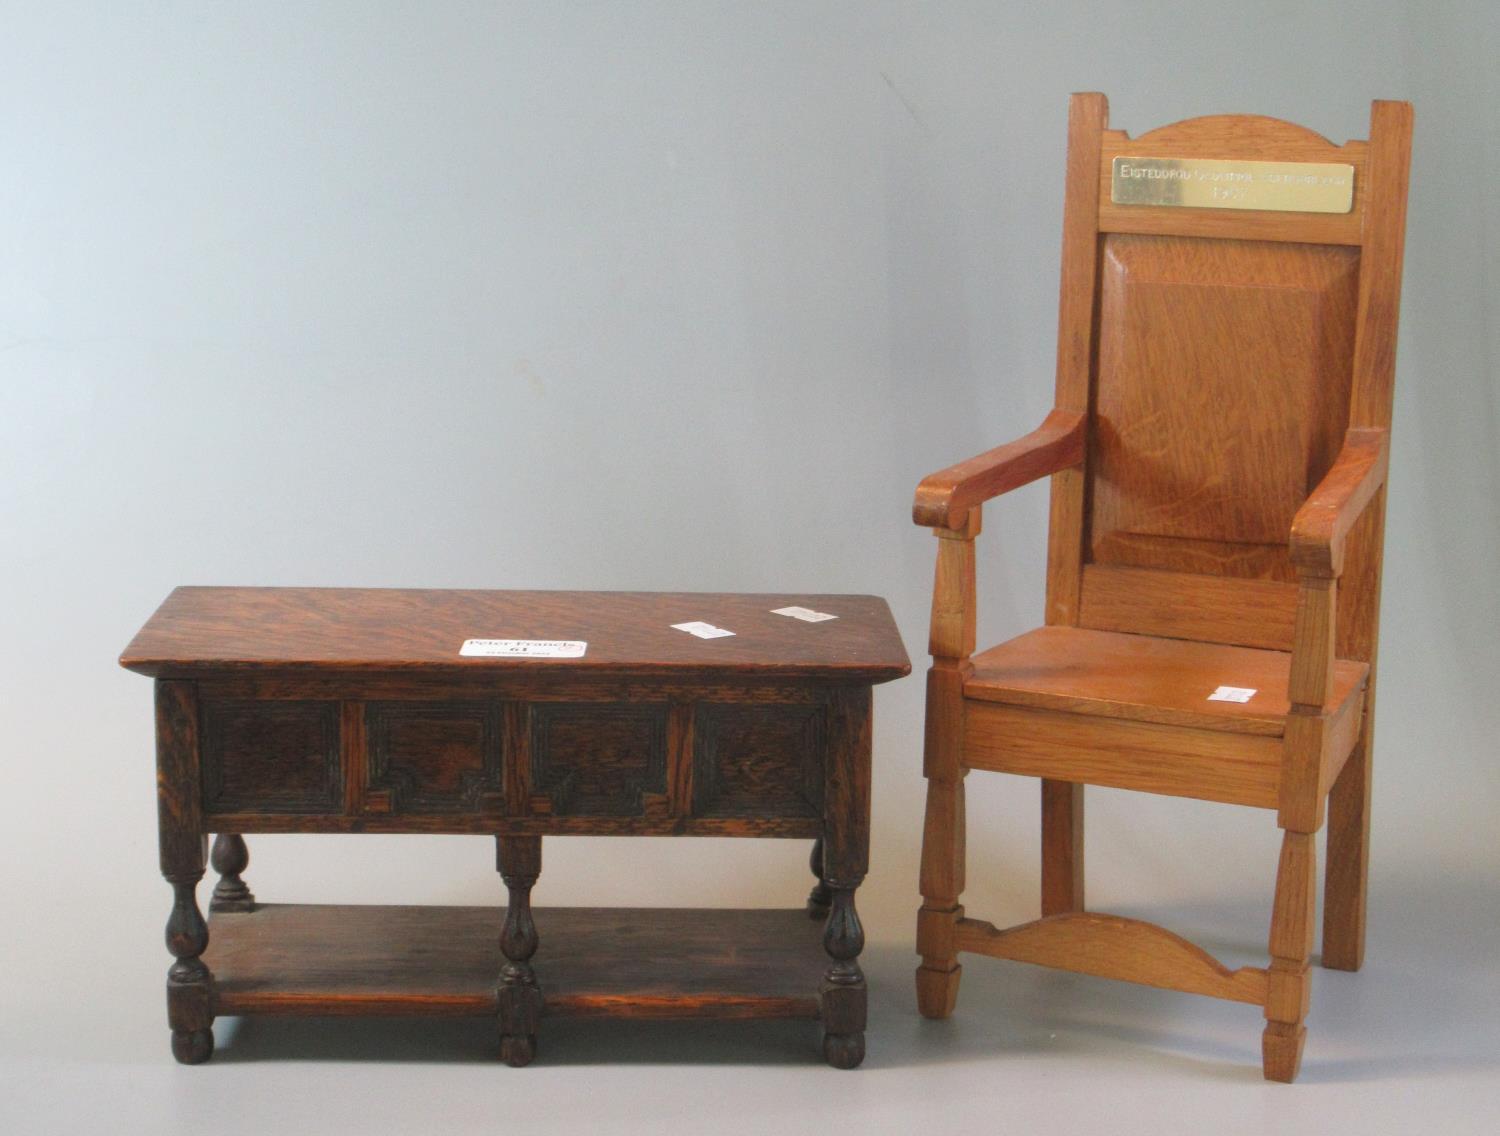 Miniature oak Eisteddfod chair, the plaque marked 1987 Abergorlech, together with another